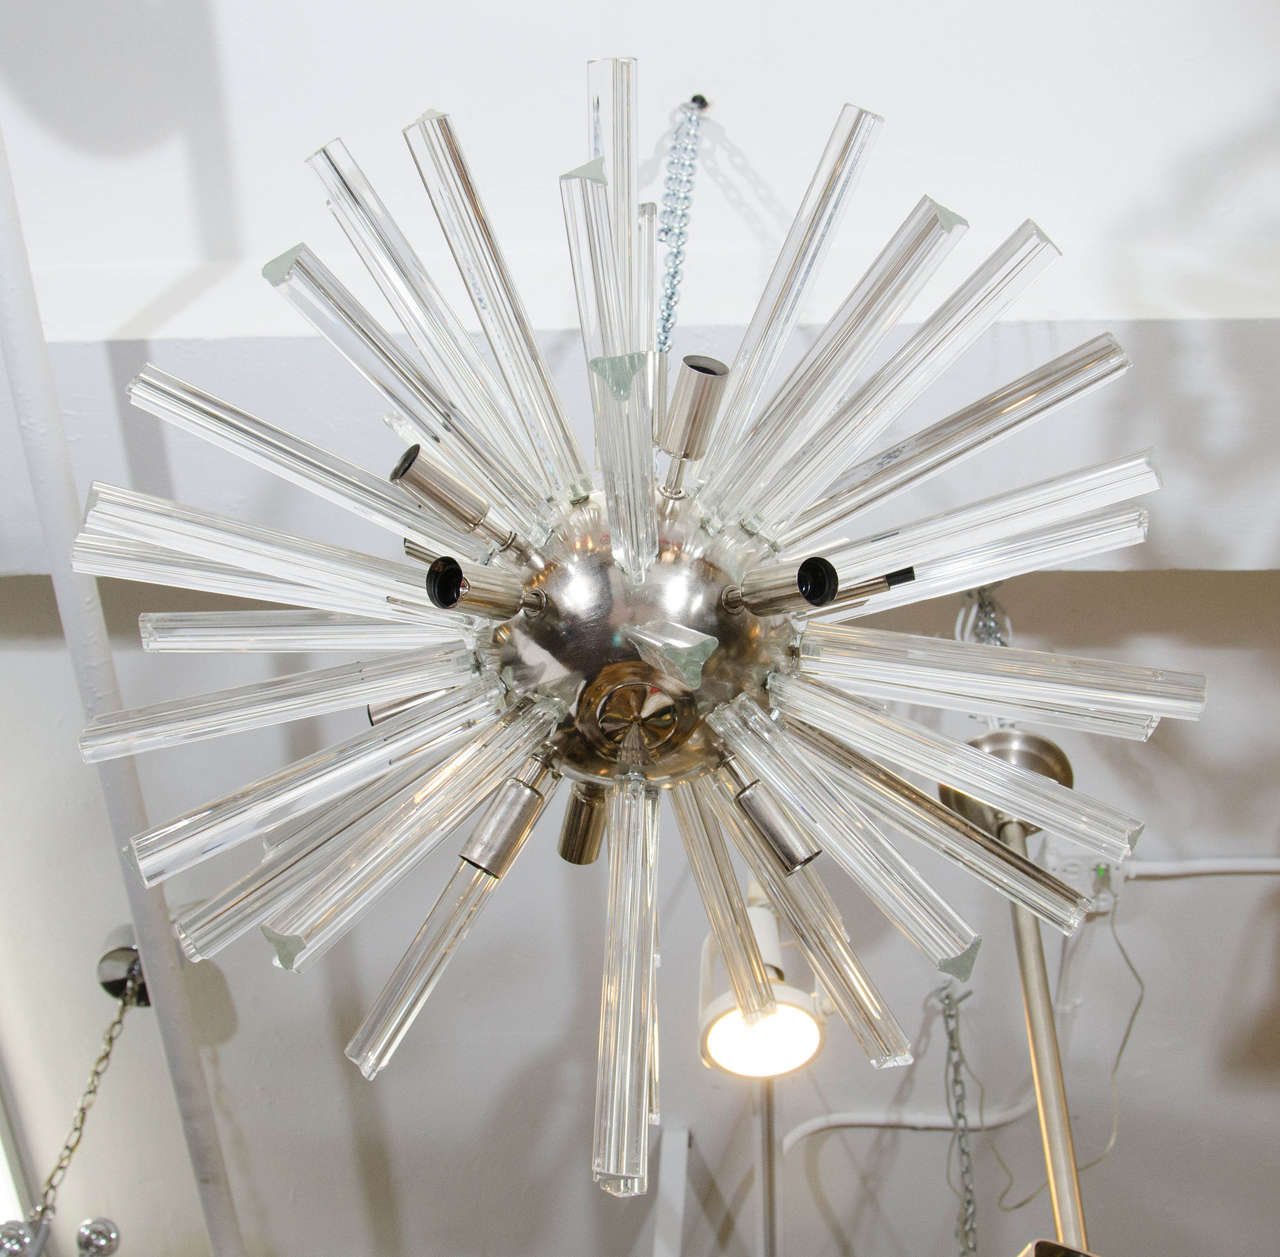 A vintage Sputnik chandelier with clear glass rods radiating out of a chrome spherical center. Good vintage condition with age appropriate wear. Several sockets are bent or need adjustment and there are a few crystals with chips and scratches.